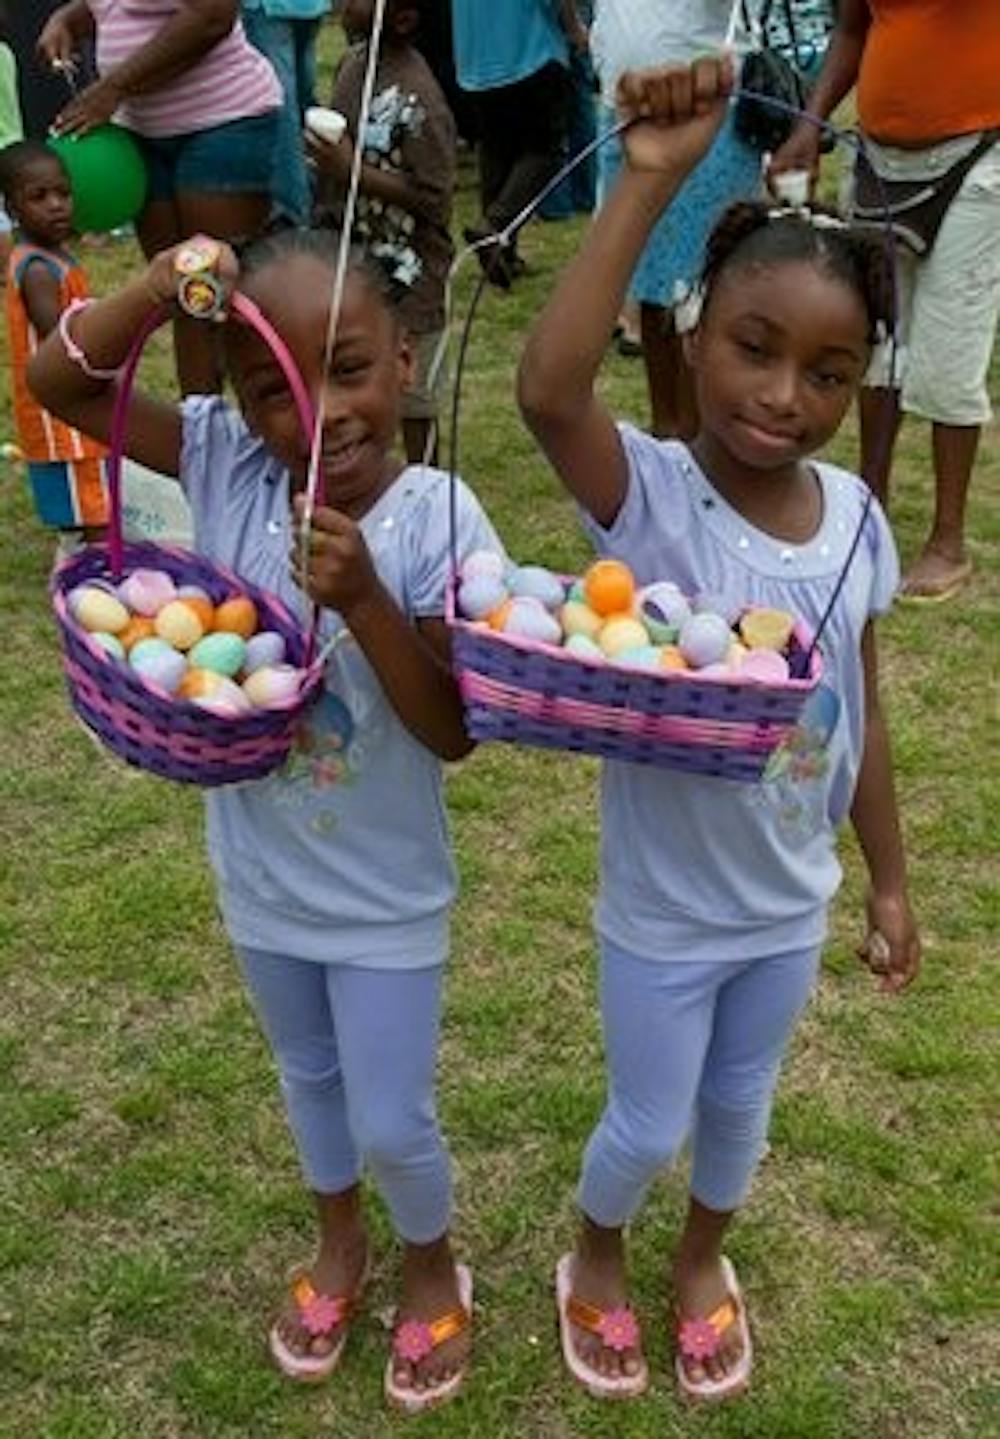 <p>Amaya and Alissa Ware, 6 and 7, of Auburn show off their Easter eggs at Kiesel Park. (FILE PHOTO)</p>